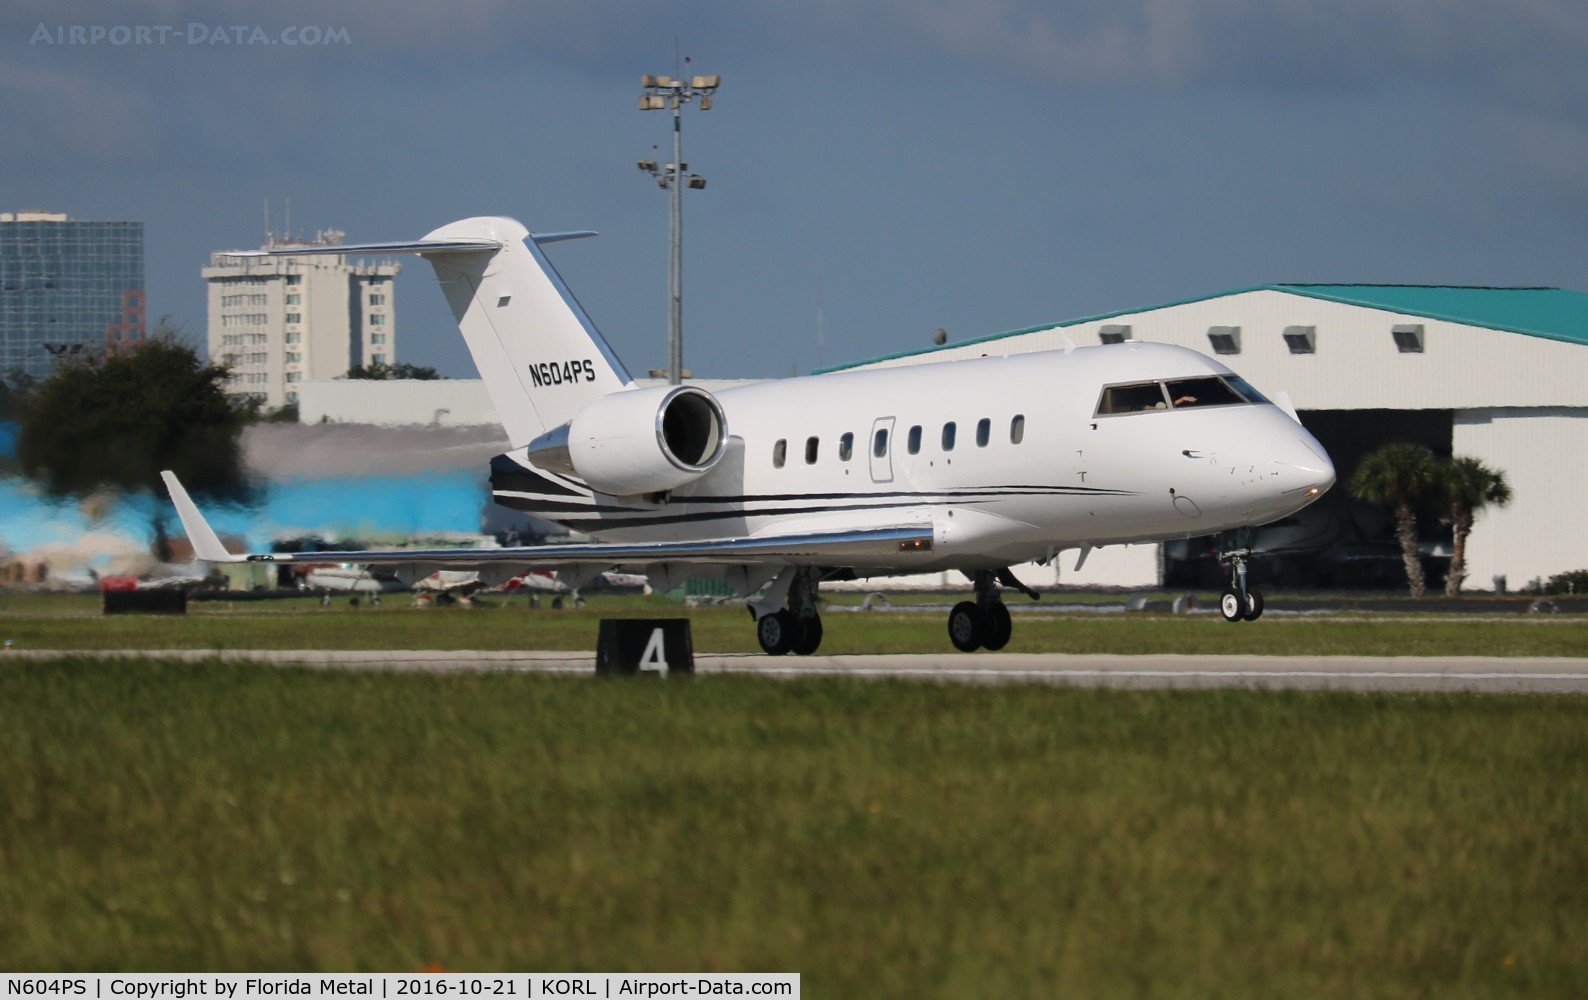 N604PS, 2000 Bombardier Challenger 604 (CL-600-2B16) C/N 5447, Challenger 604 zx